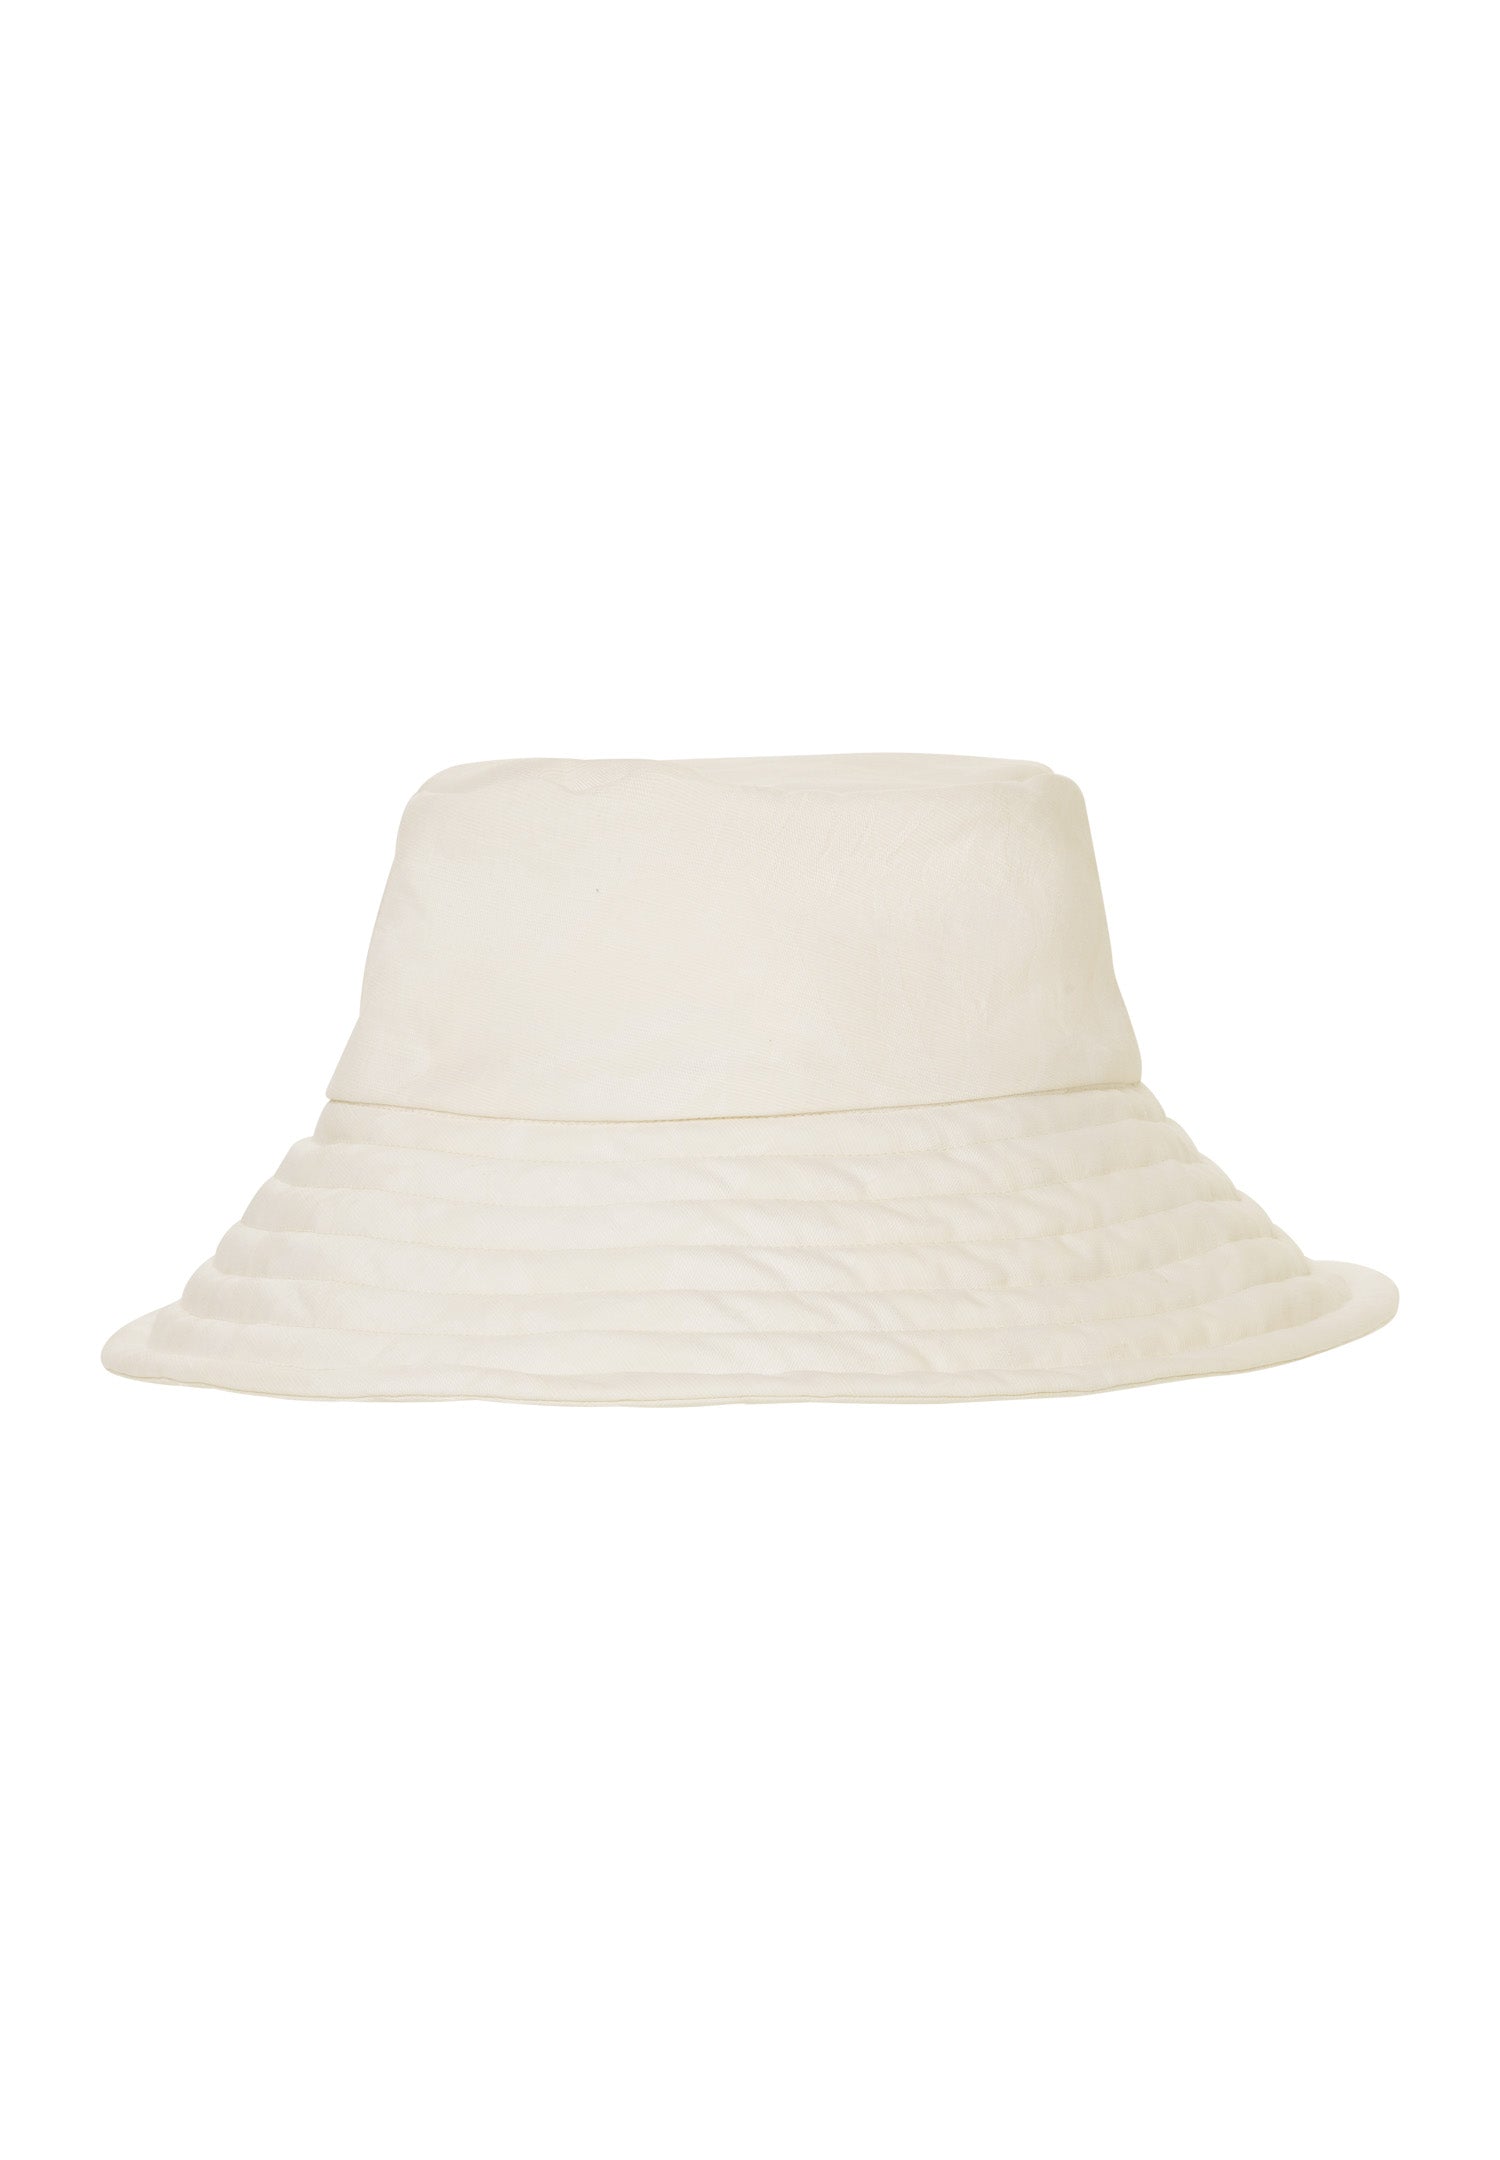 78841 BUCKET HAT - 1790 Shaded Blossoms